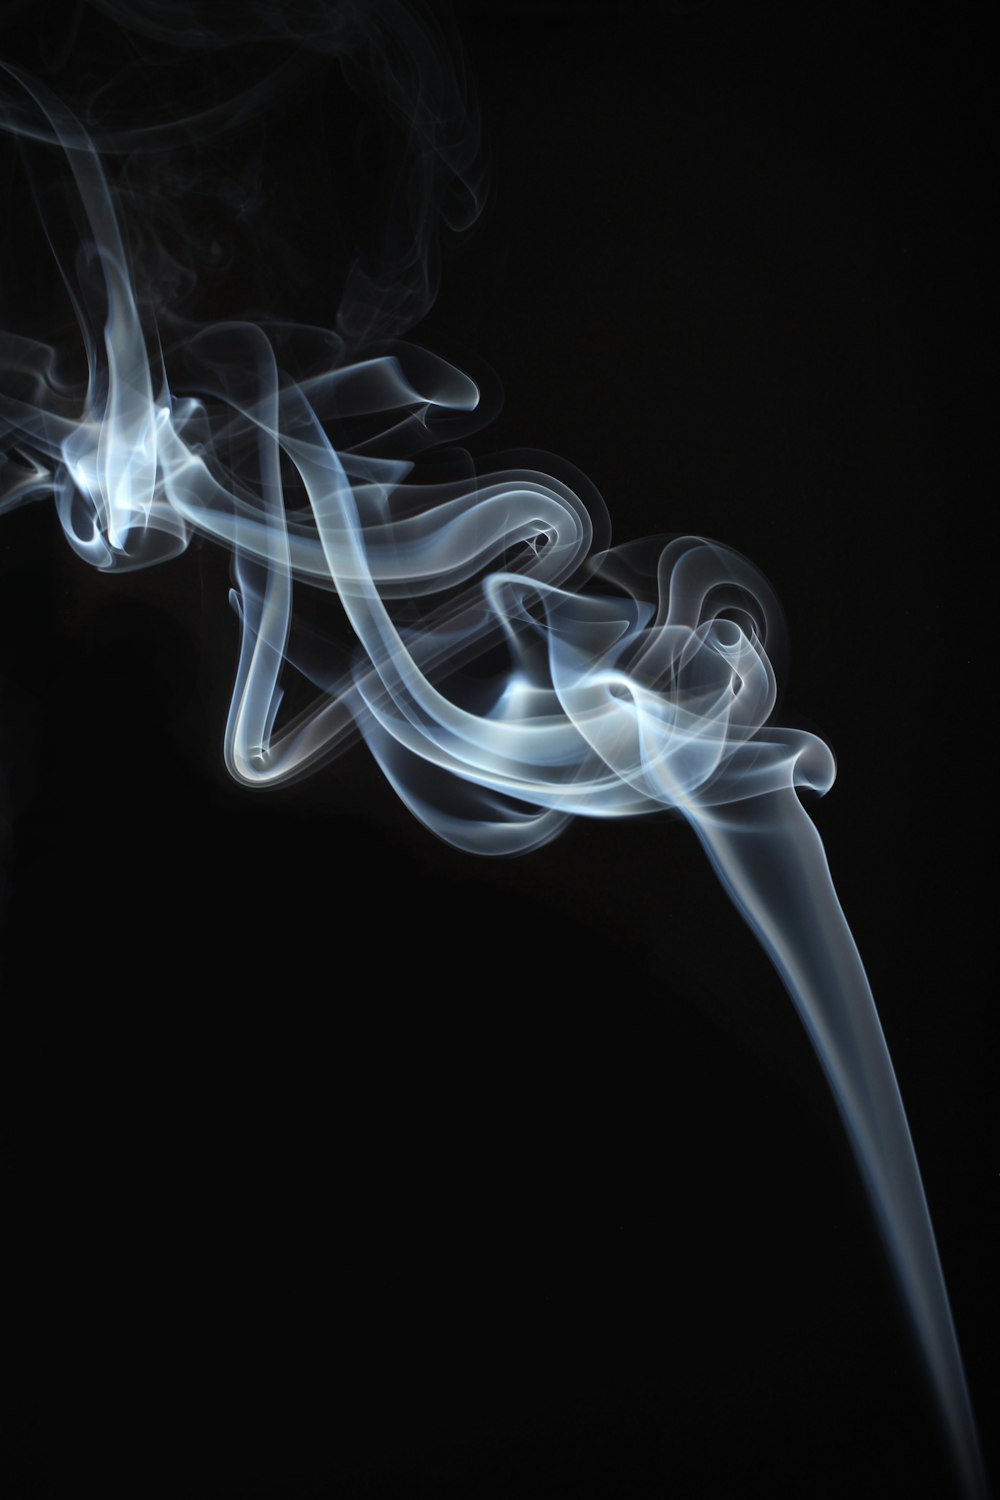 Black And White Smoke Pictures Download Free Images On Unsplash Images, Photos, Reviews